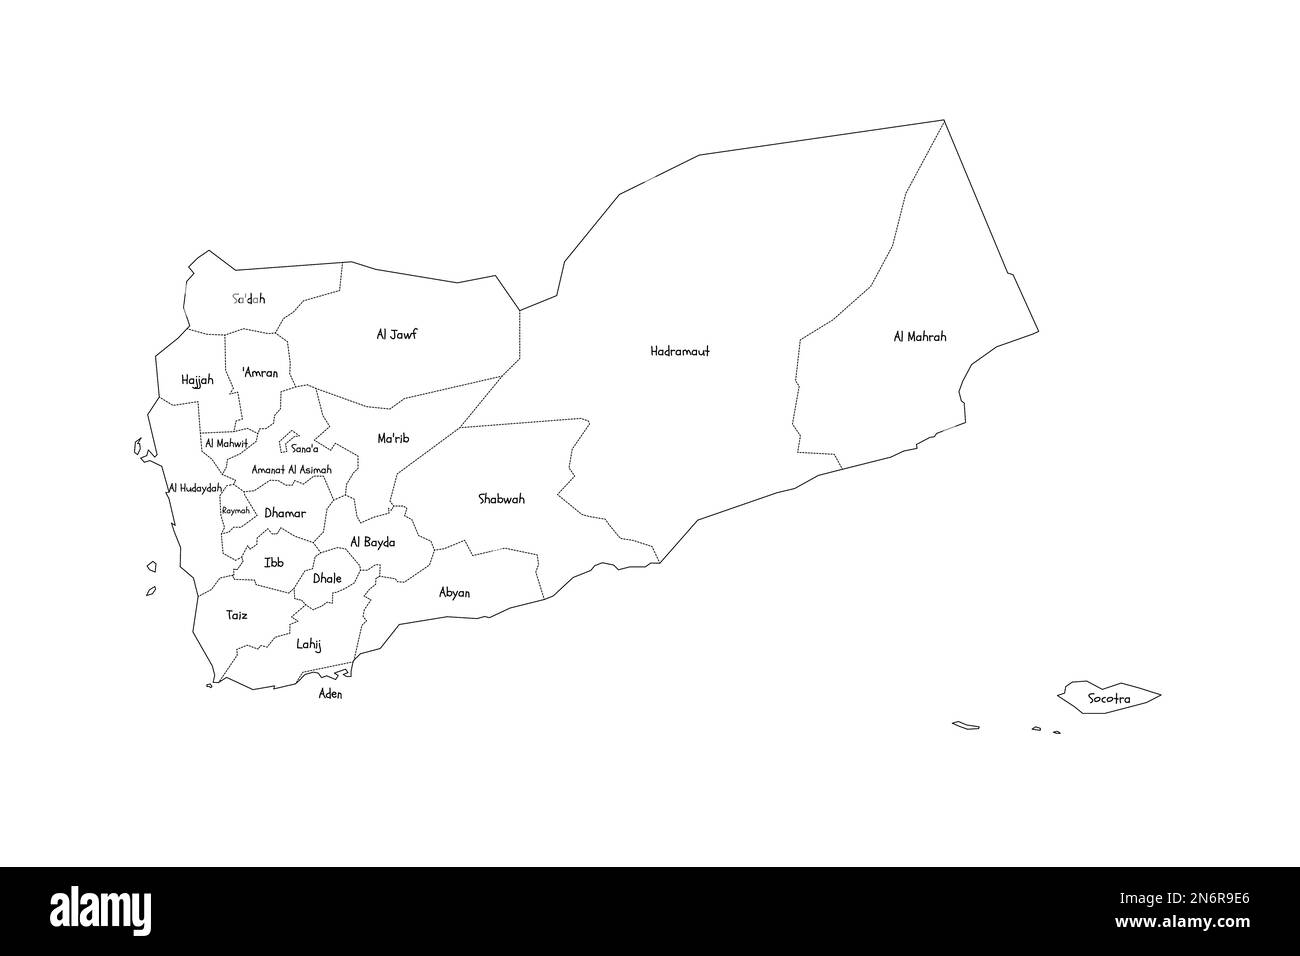 Yemen political map of administrative divisions - governorates and municipality of Sanaa. Handdrawn doodle style map with black outline borders and name labels. Stock Vector